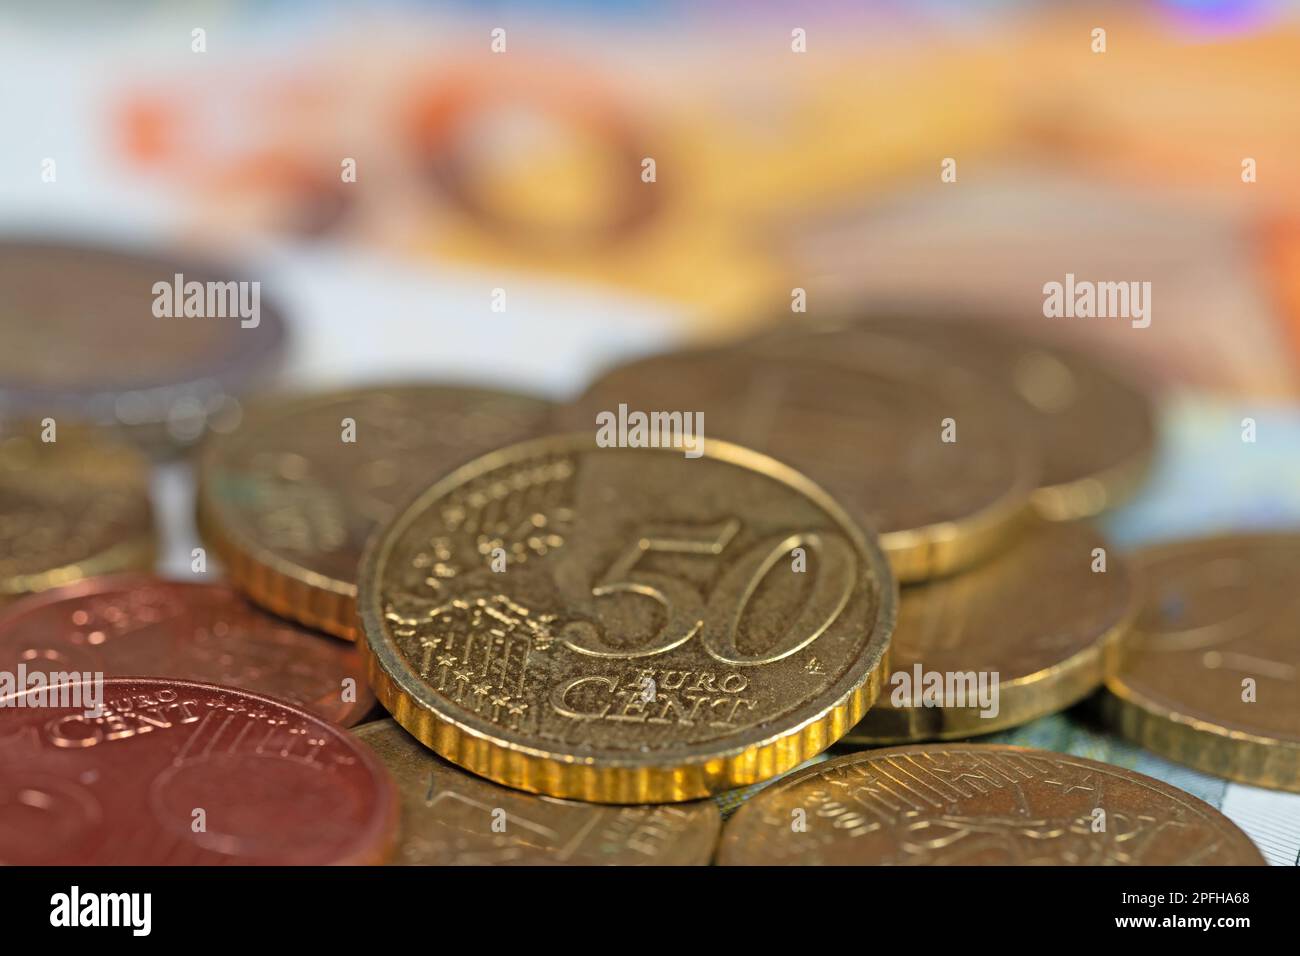 Euro cent coins in a close up view Stock Photo